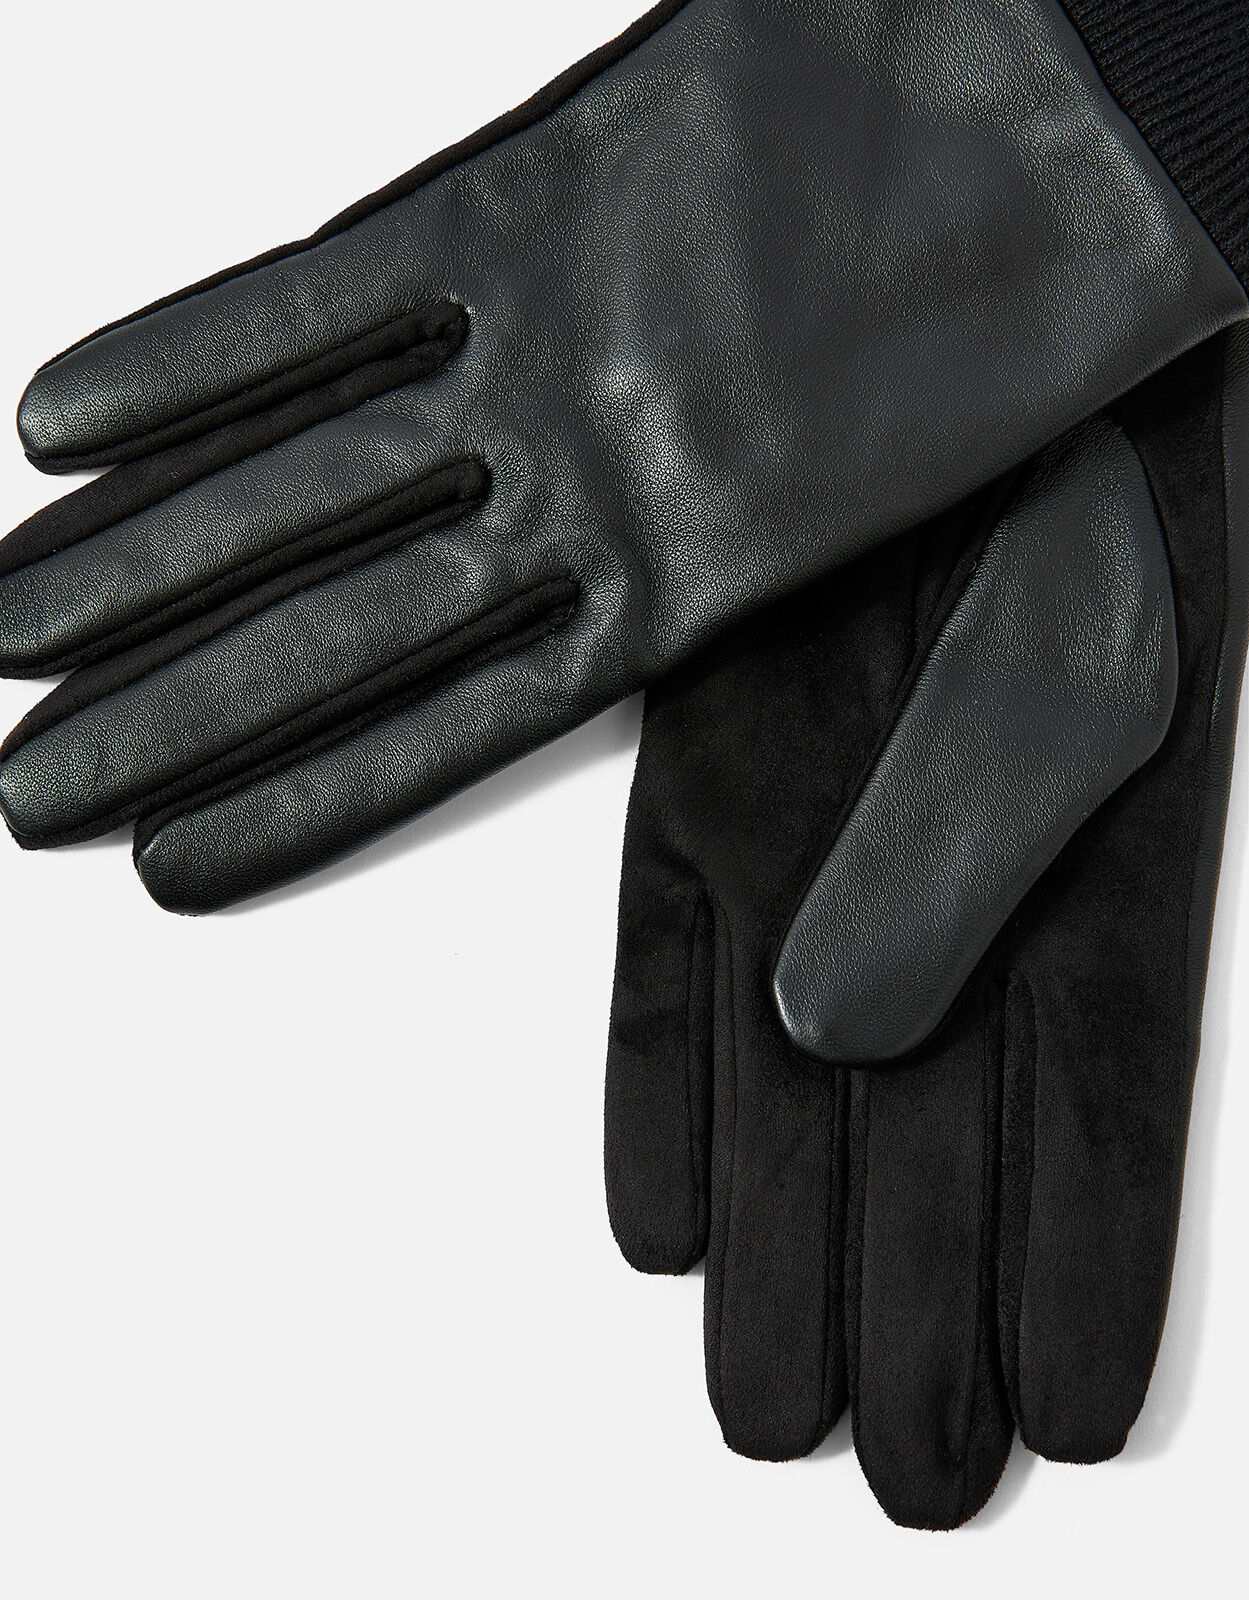 Accessoires Handschoenen & wanten Rijhandschoenen Woman's Size 7 Made in Italy  Black Kid Leather Unlined Gloves with Gold Plated Black Enamel Insert Appliques Black Leather Driving Glove 